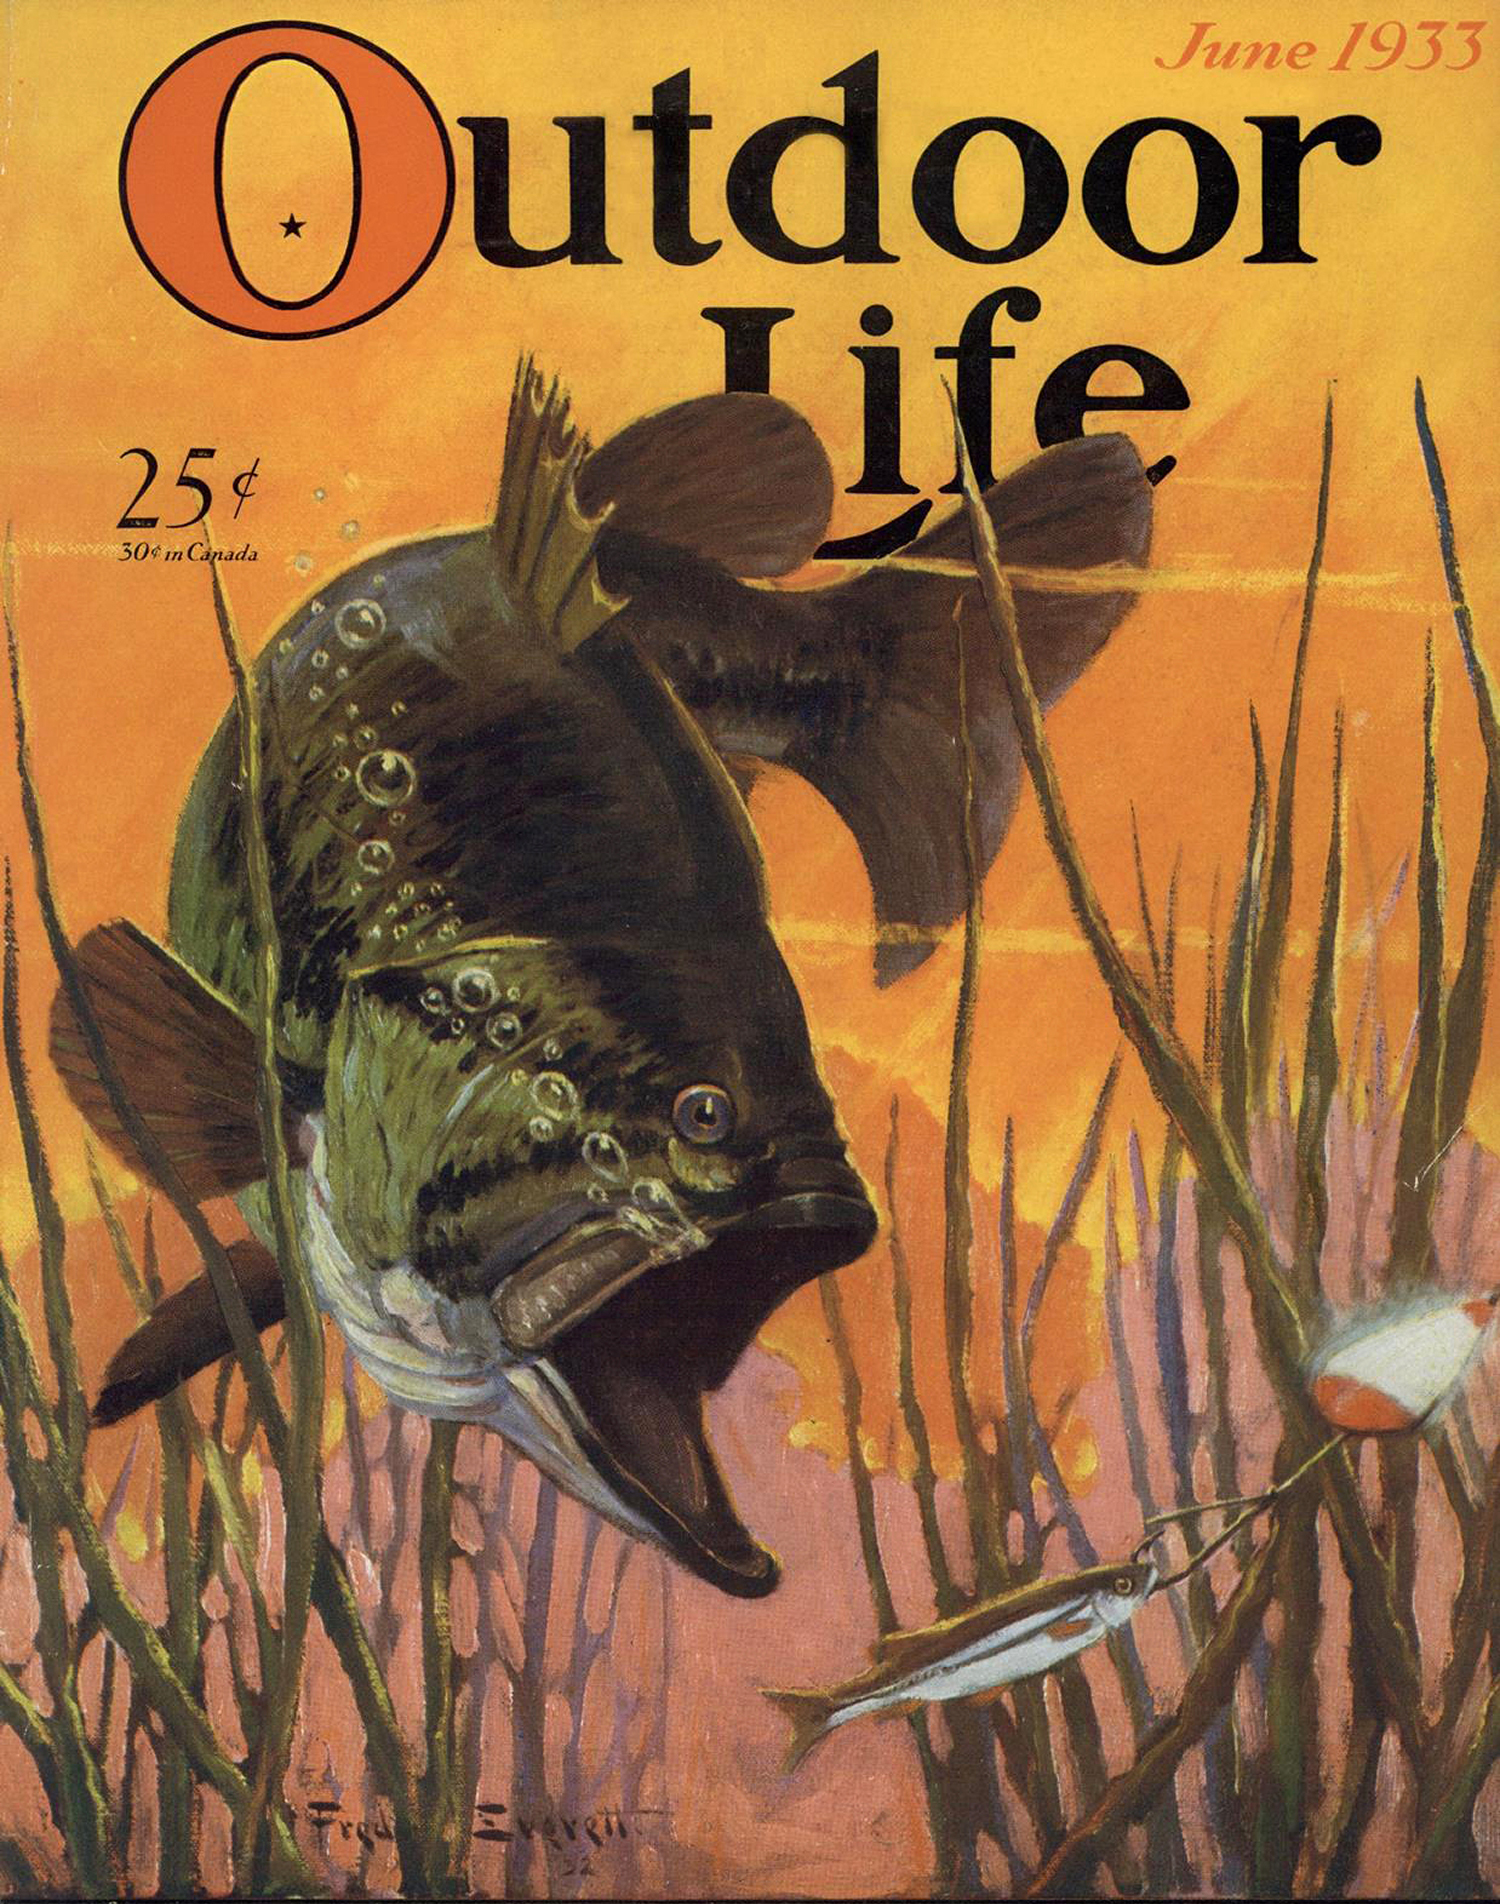 June 1933: While trout covers were common in OL’s infancy, bass quickly took over.